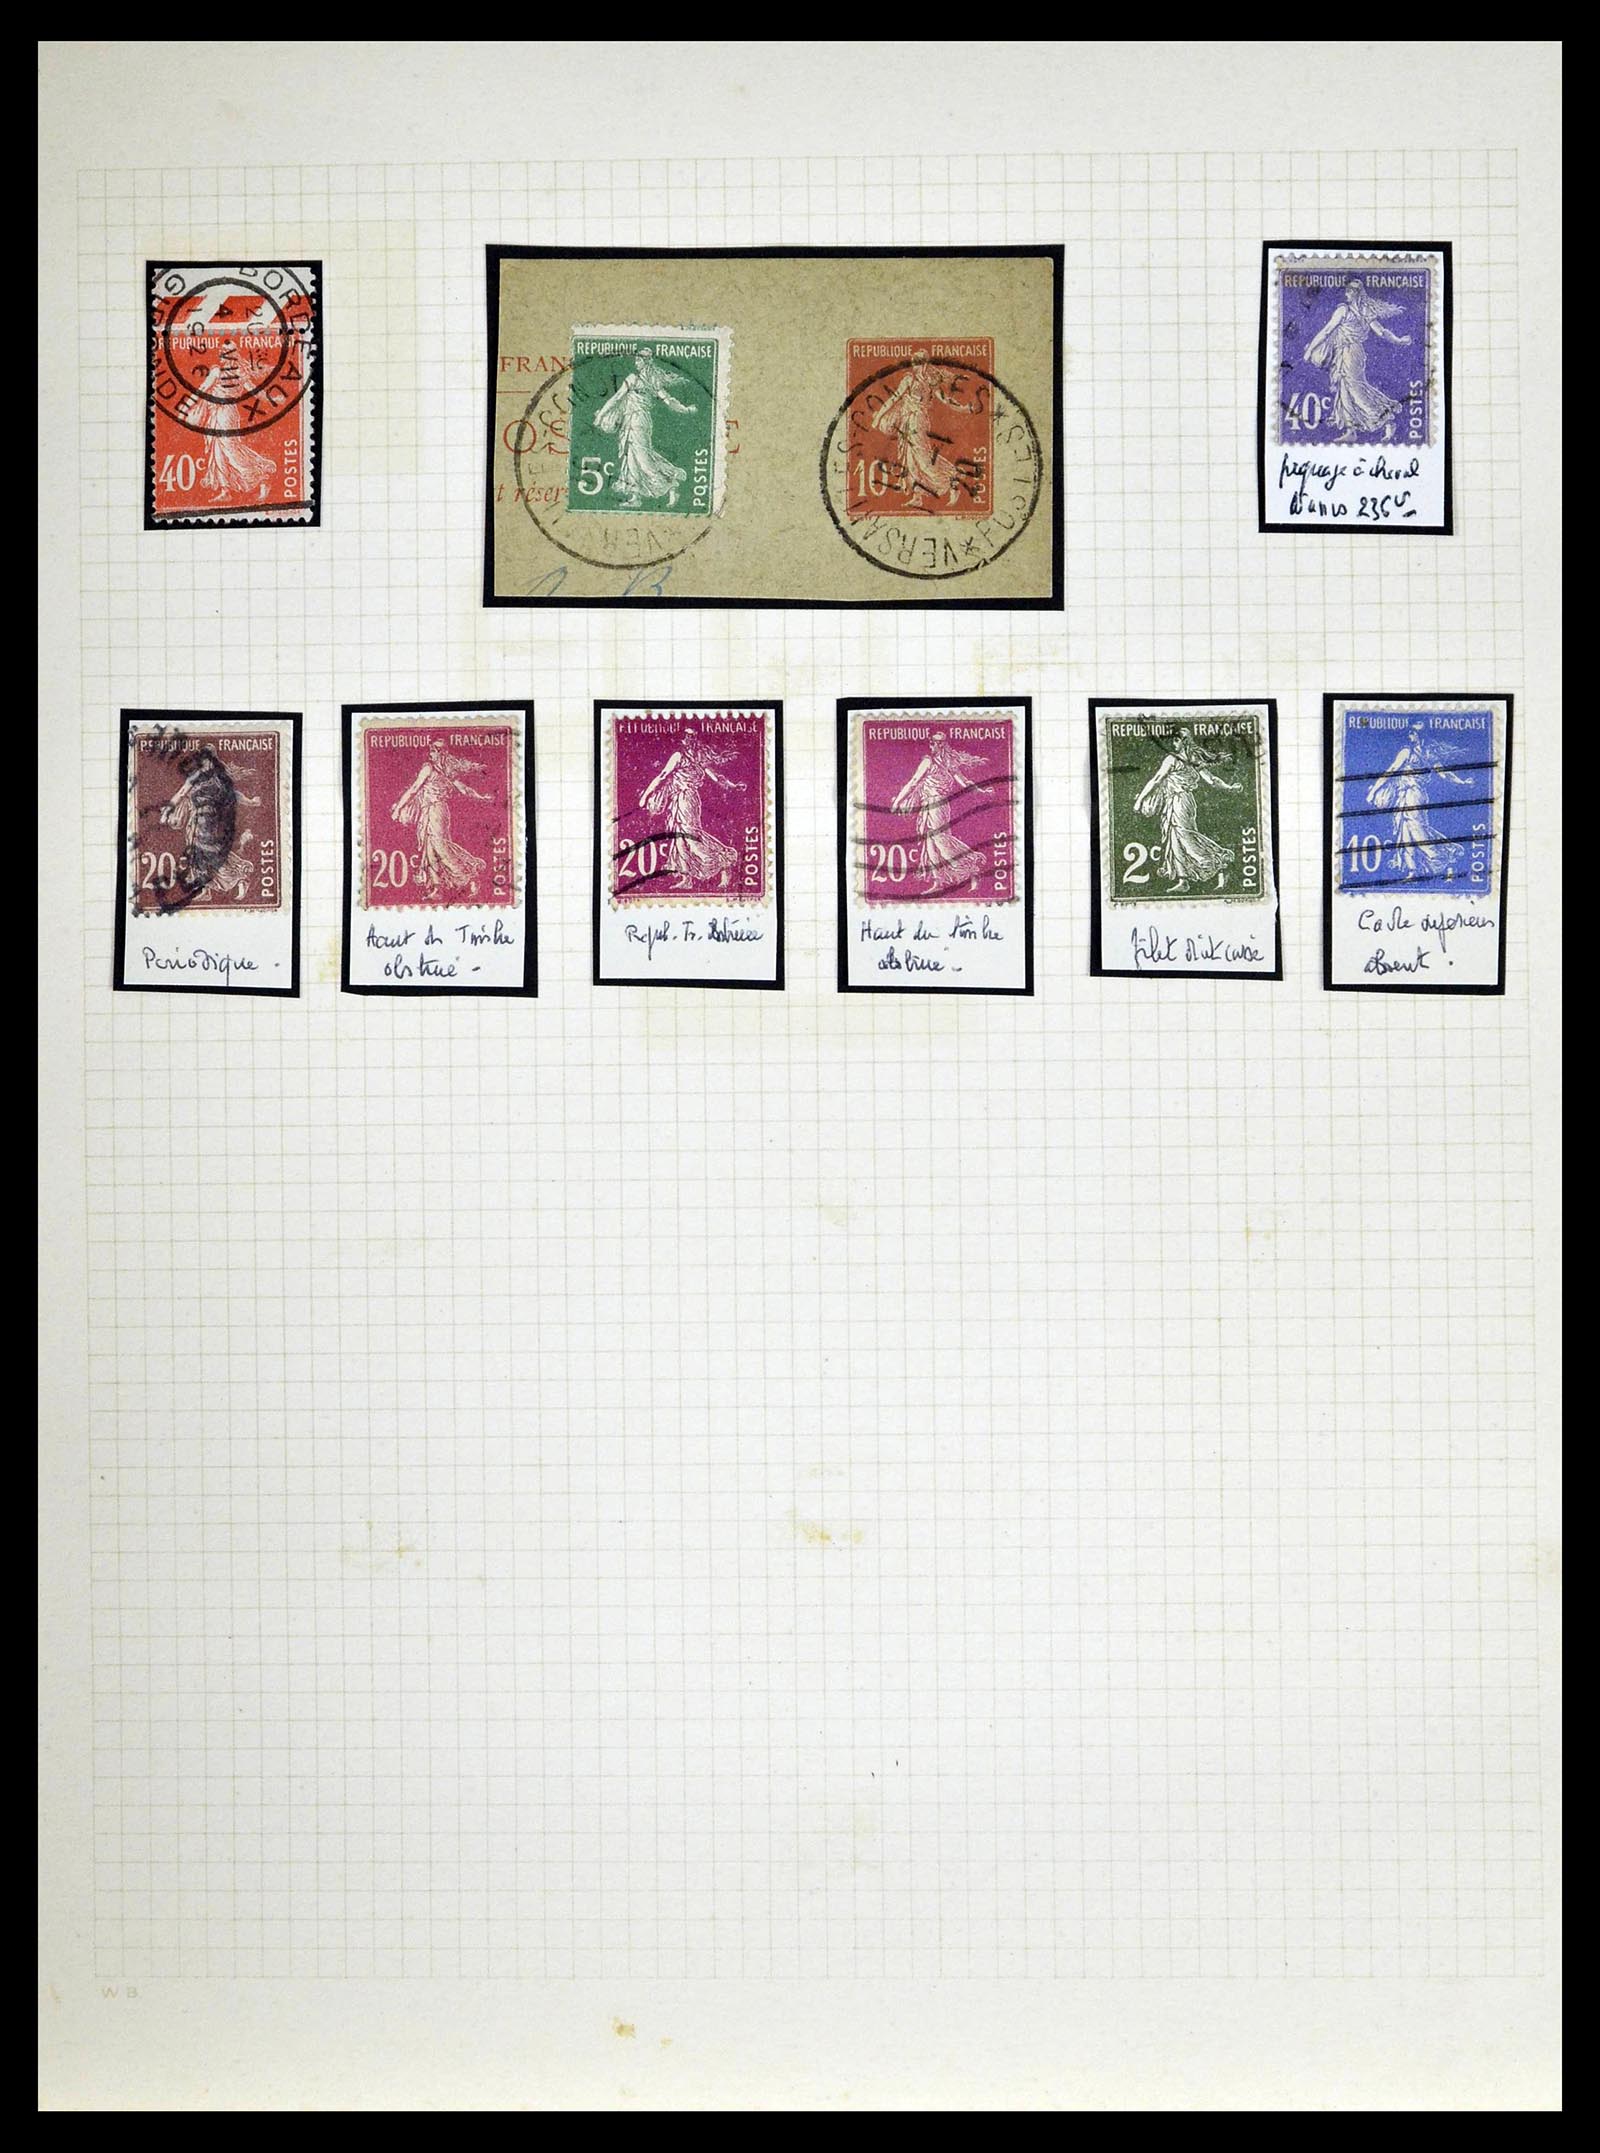 39329 0062 - Stamp collection 39329 France Semeuse.